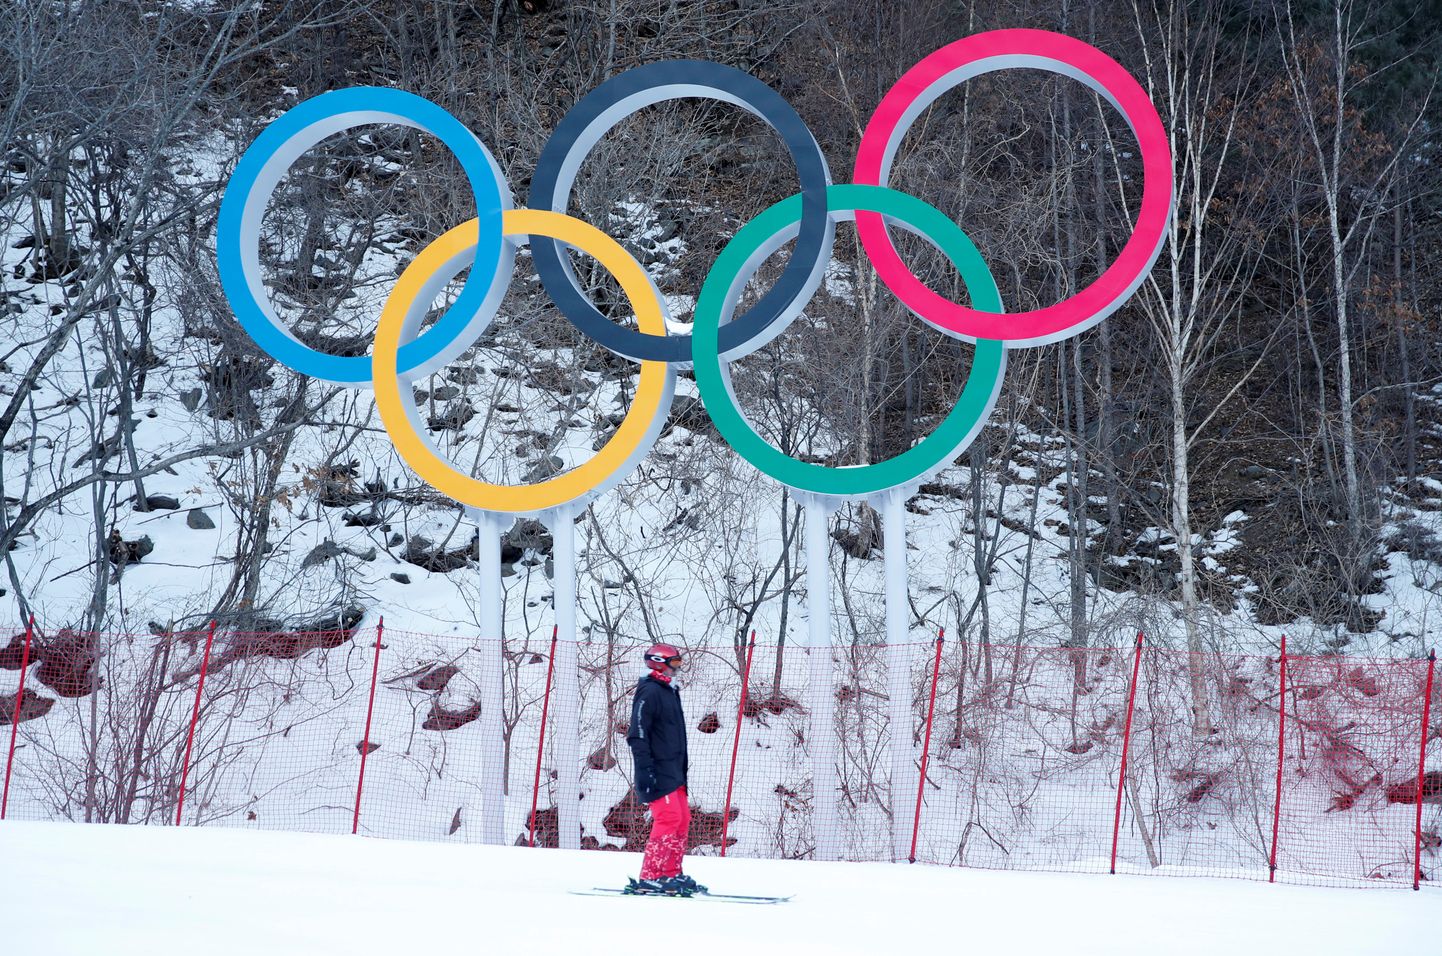 FILE PHOTO: Alpine Skiing – Pyeongchang 2018 Winter Olympics – Men’s Downhill – Jeongseon Alpine Centre - Pyeongchang, South Korea – February 11, 2018 - The Olympics rings are seen at the Alpine venue after the men's downhill was postponed due to strong winds. REUTERS/Mike Segar/File Photo